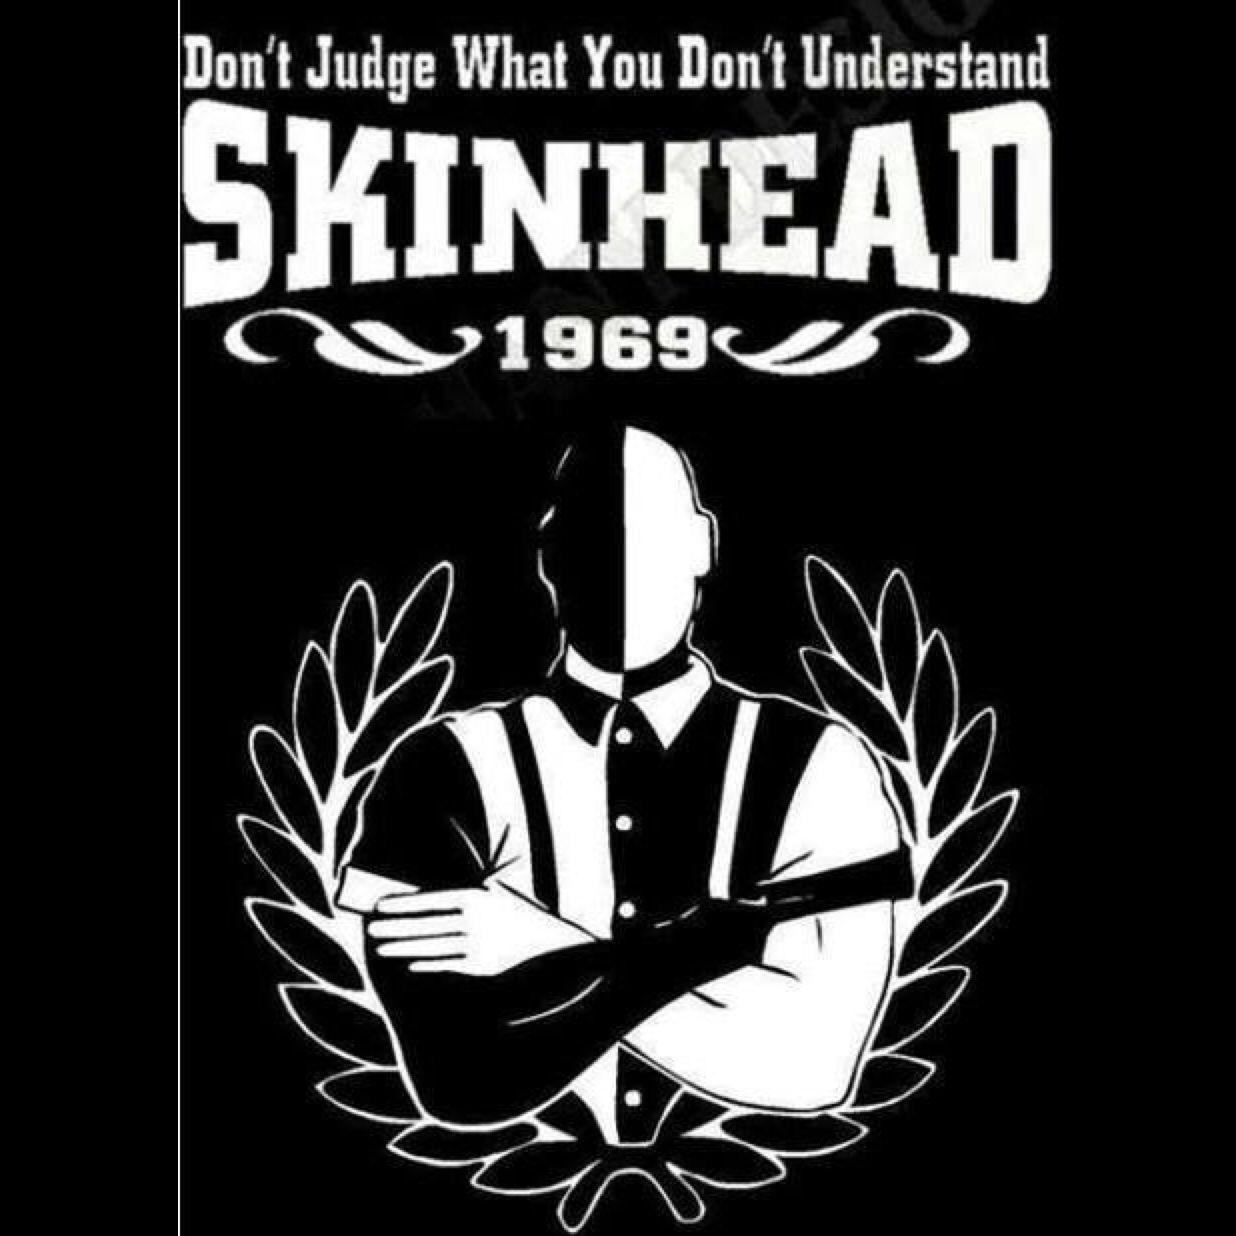 Skinhead Logo - It not always about fighting it way of life working class. Trad